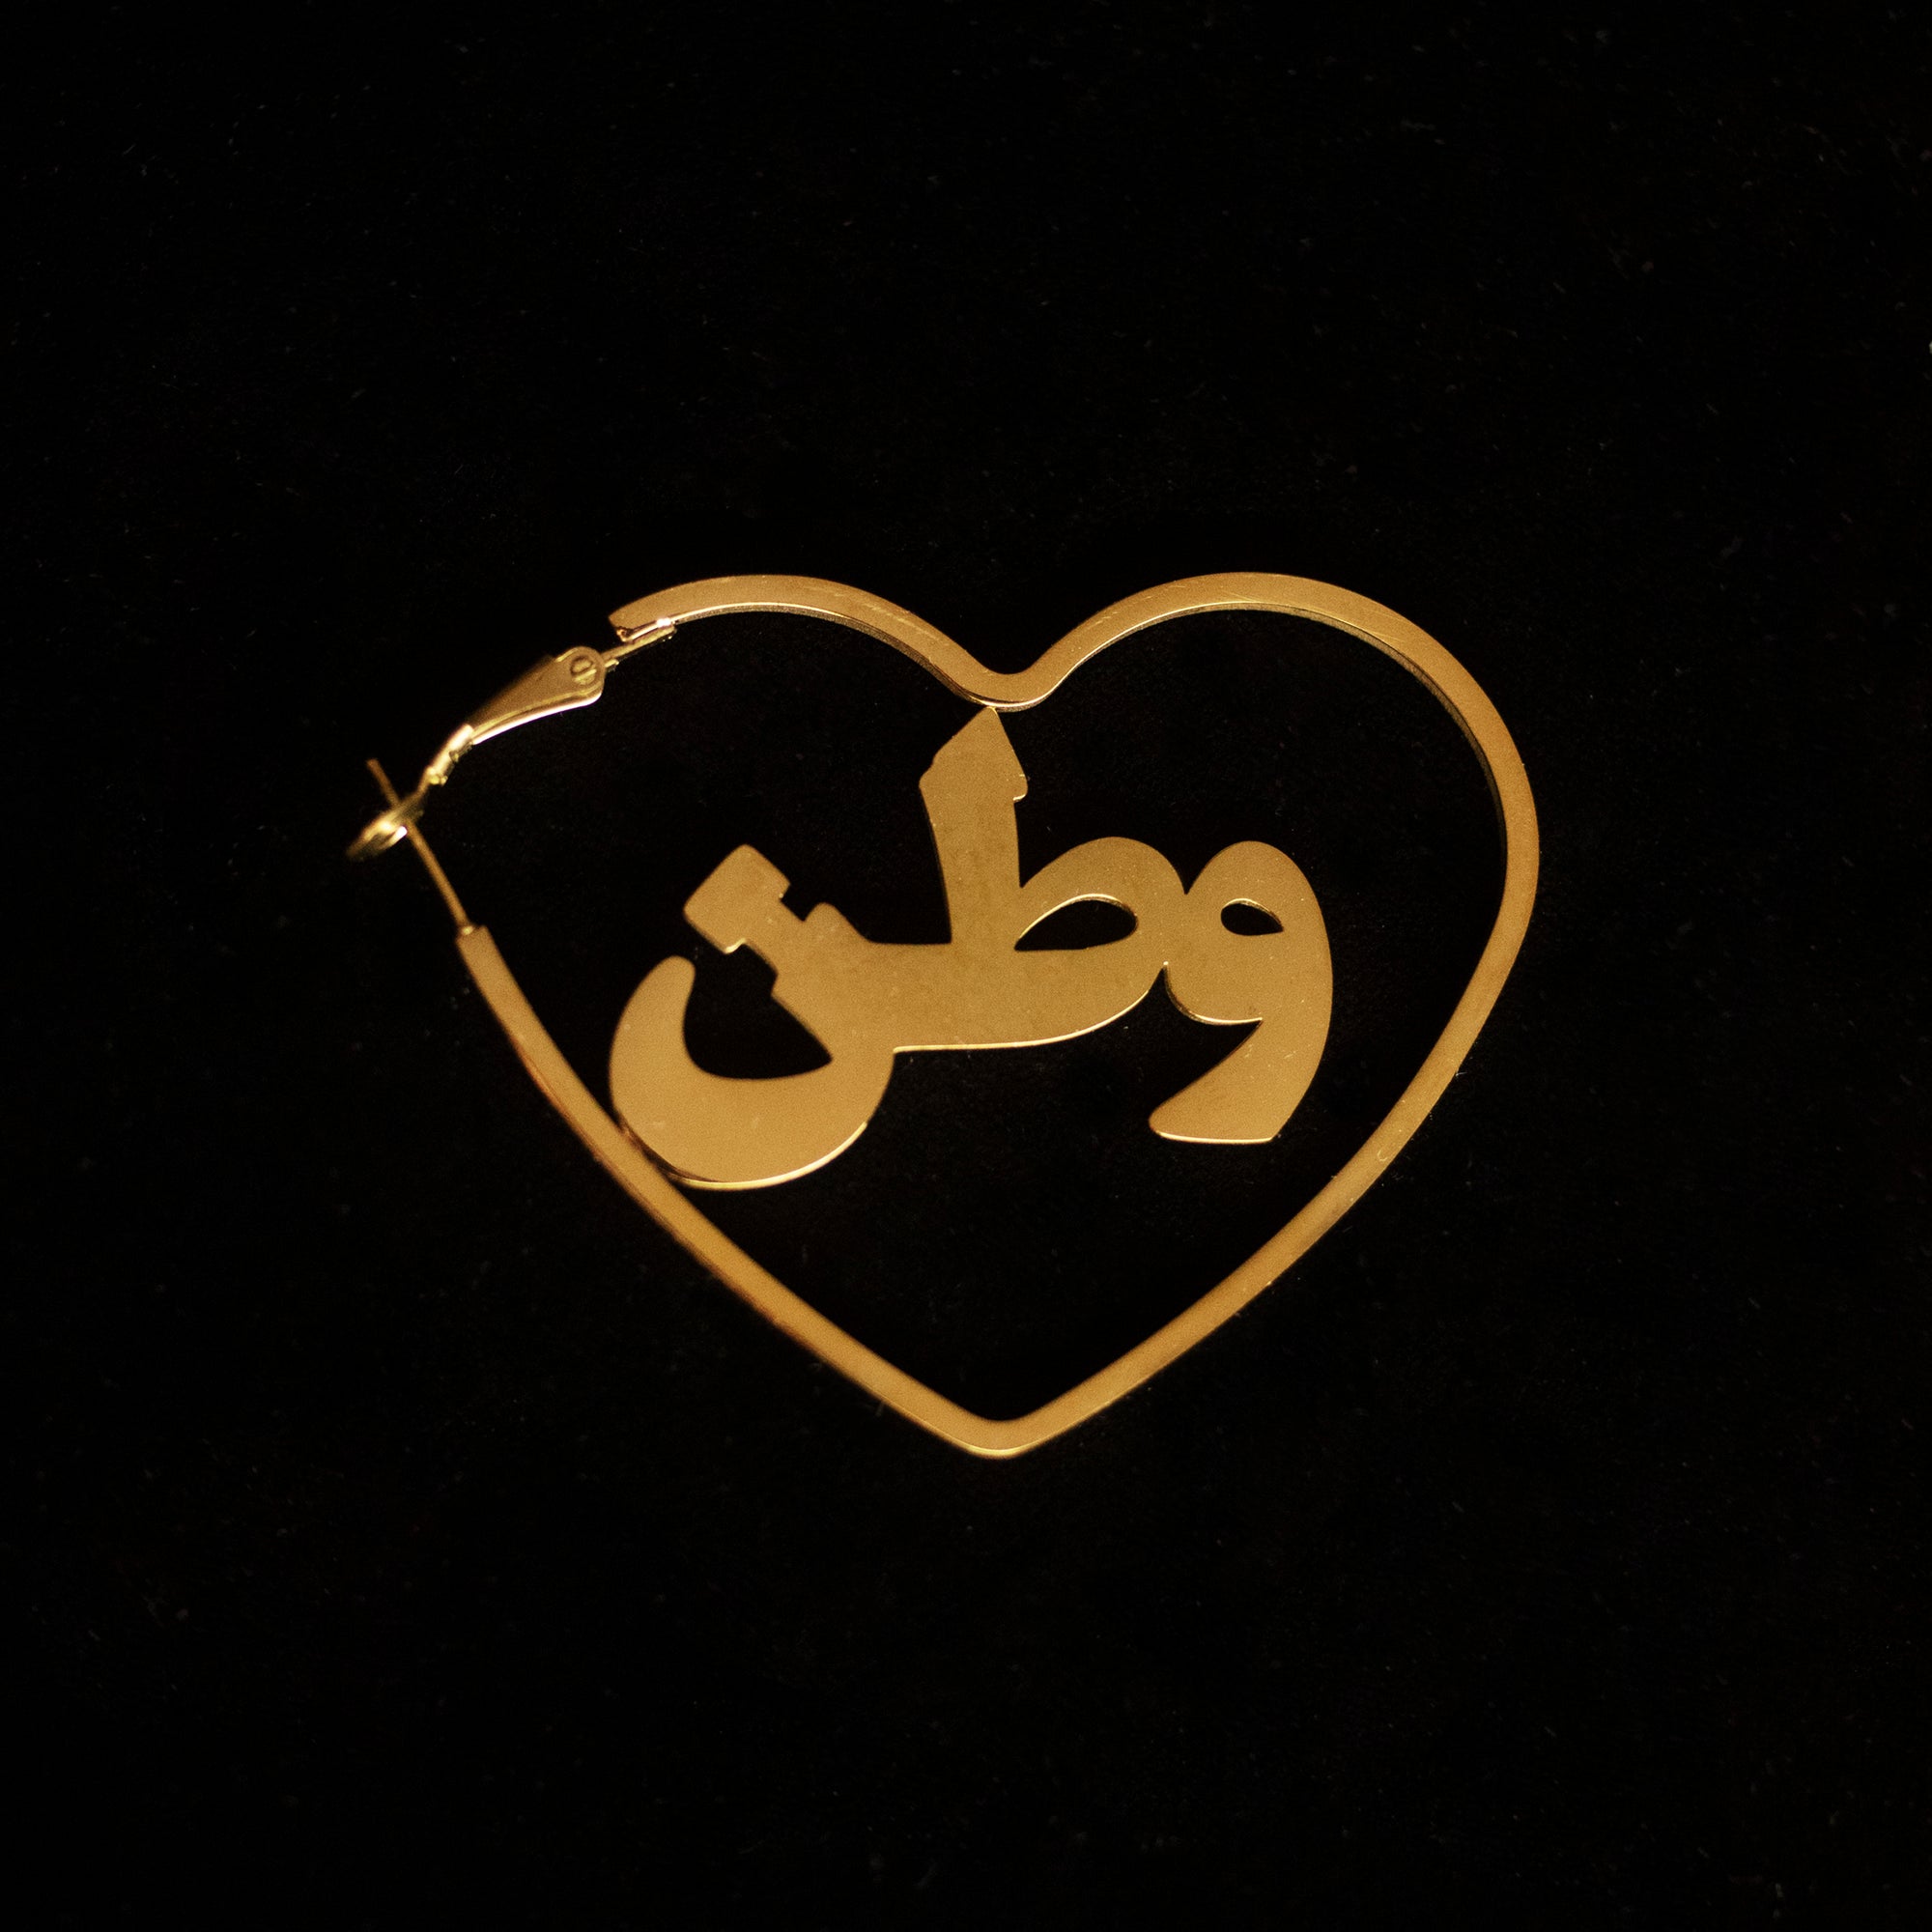 Gold hoops in the shape of a heart with the word 'watan' on it against a black back drop.